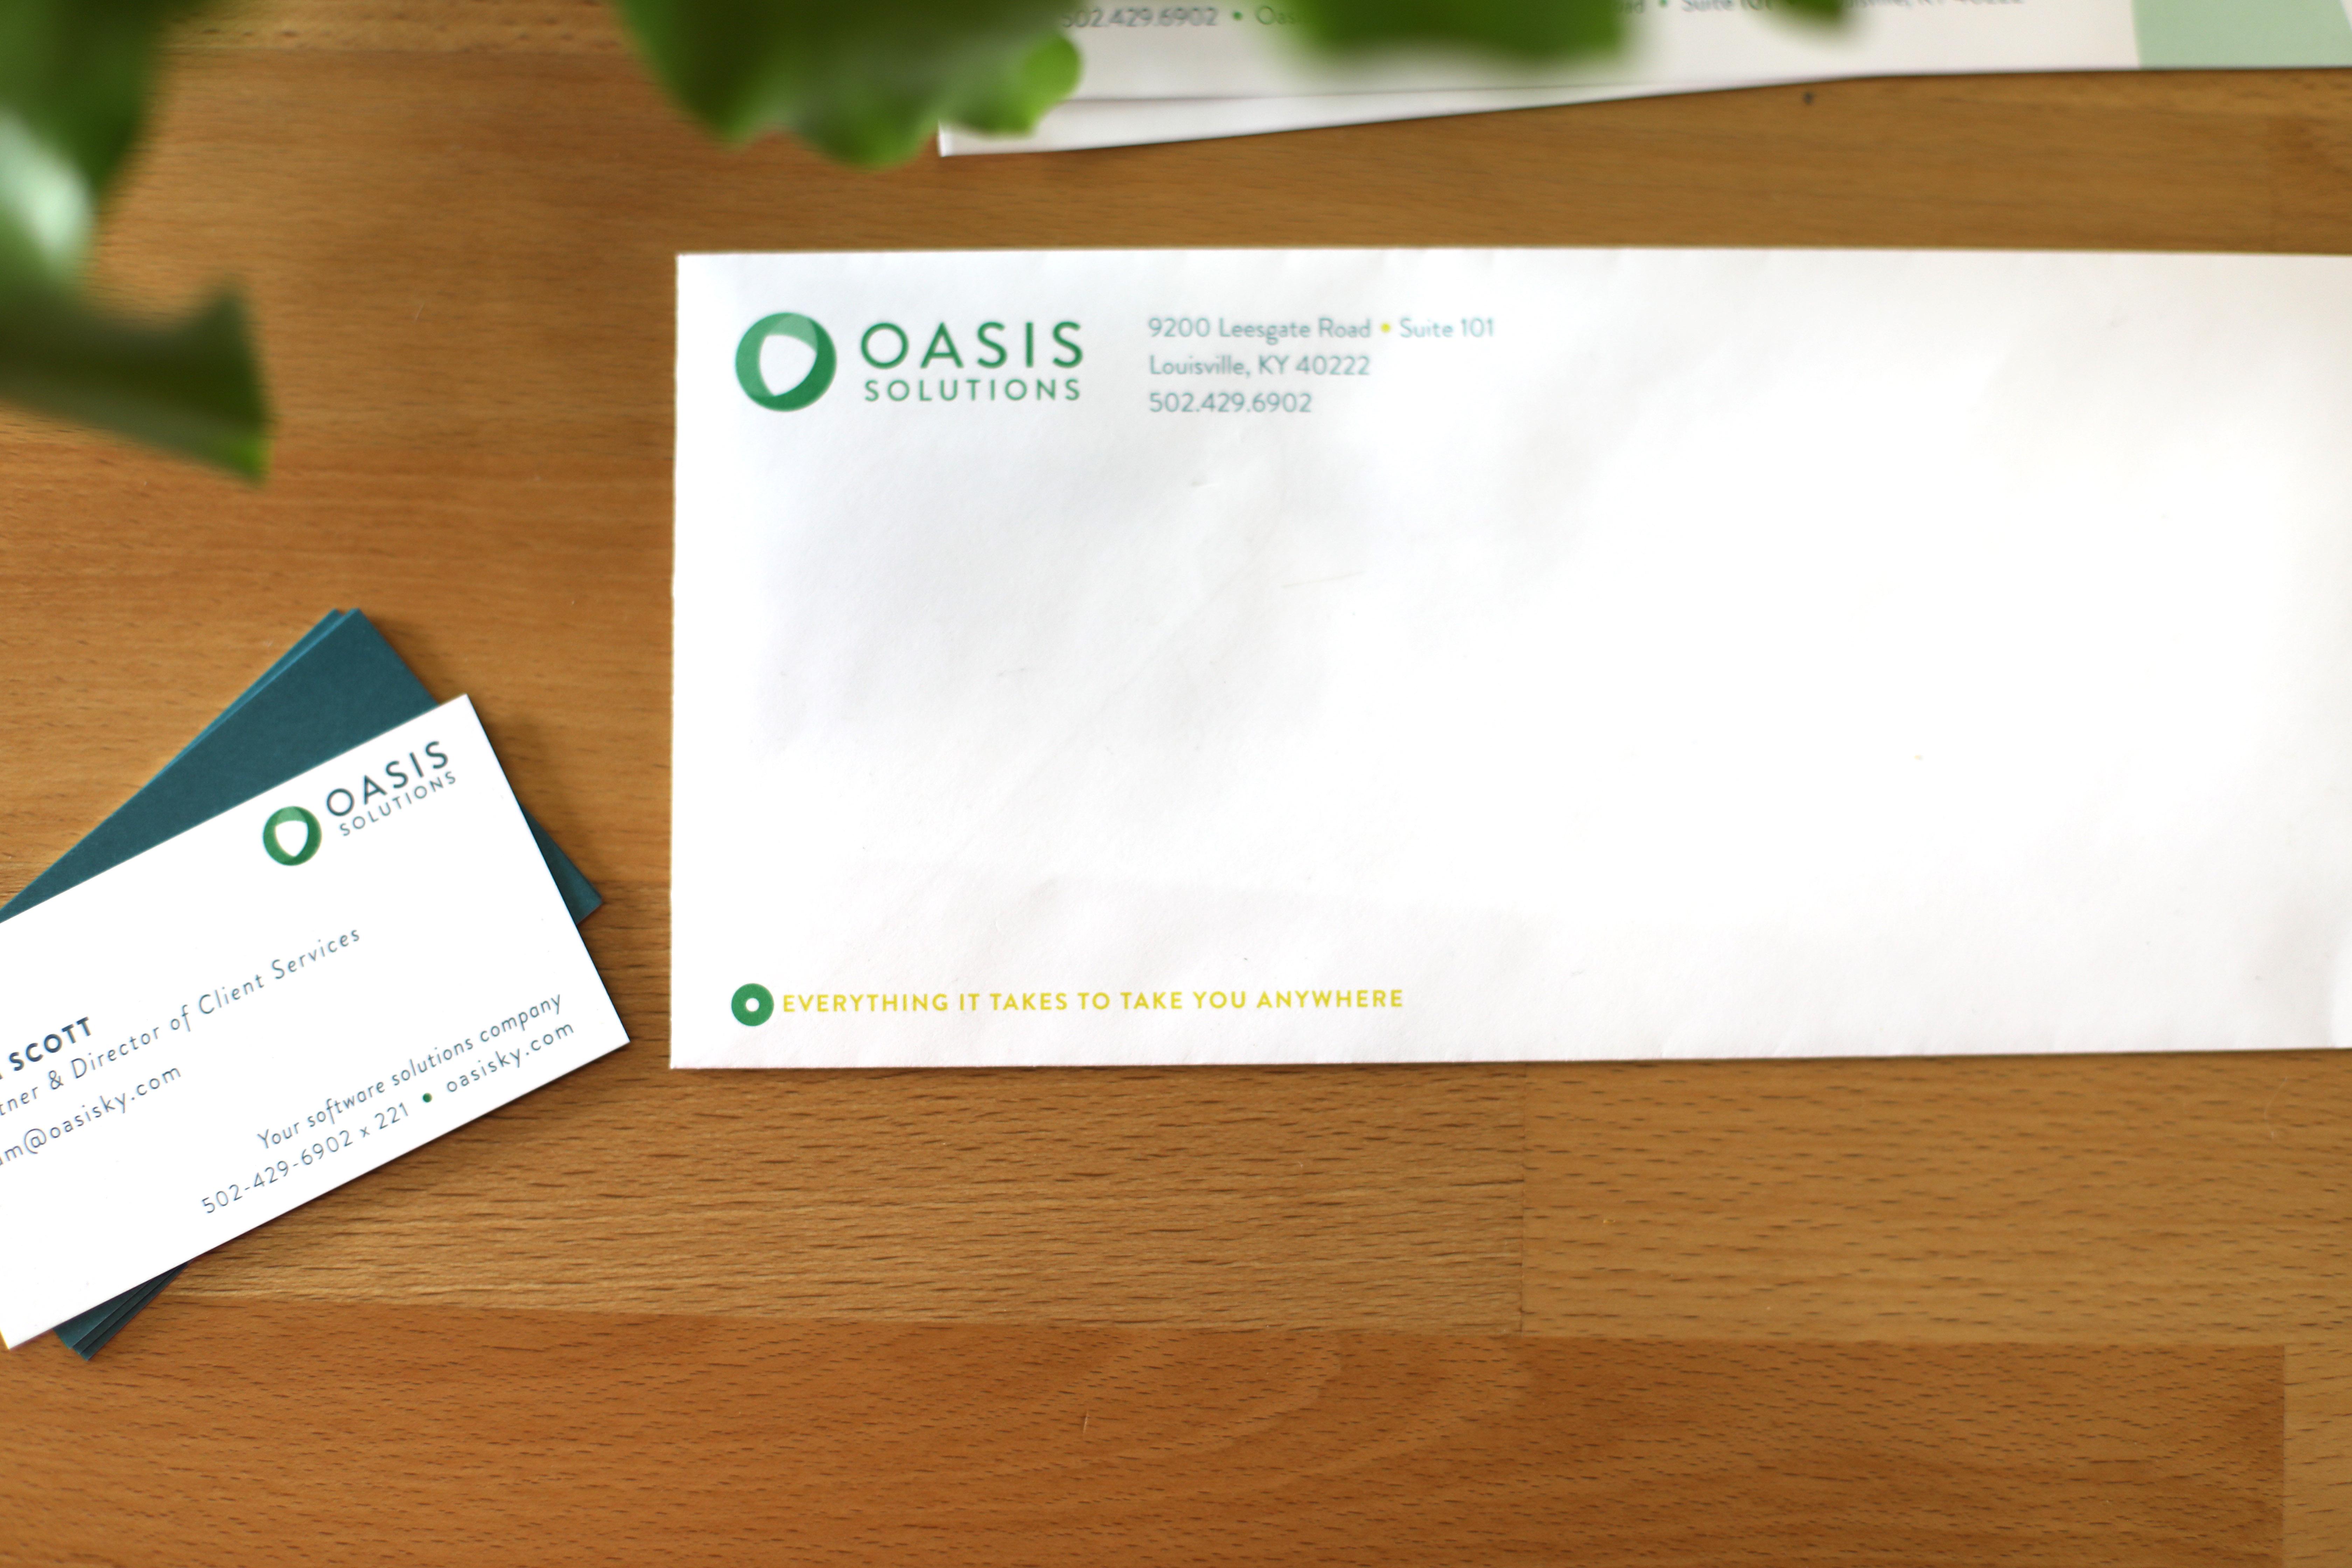 Oasis envelope and business cards.